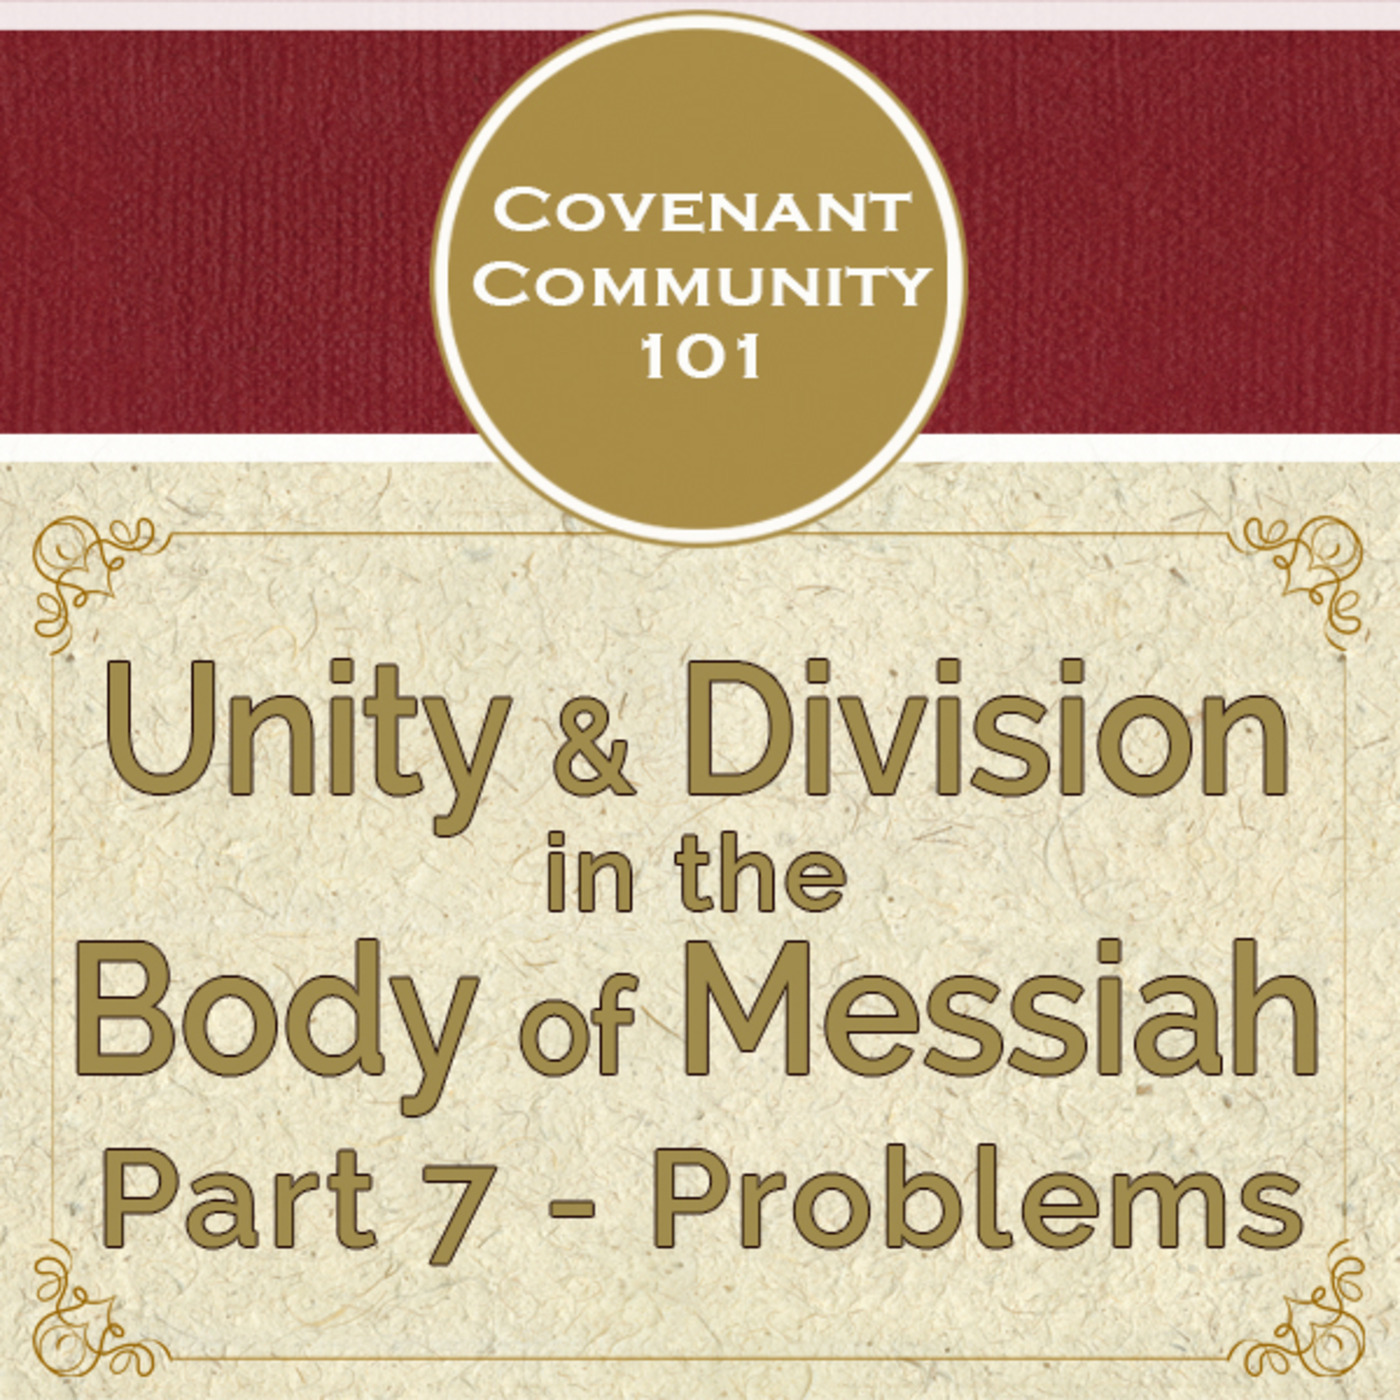 Covenant Community 101: Unity & Division in the Body of Messiah - Part 7 - Problems